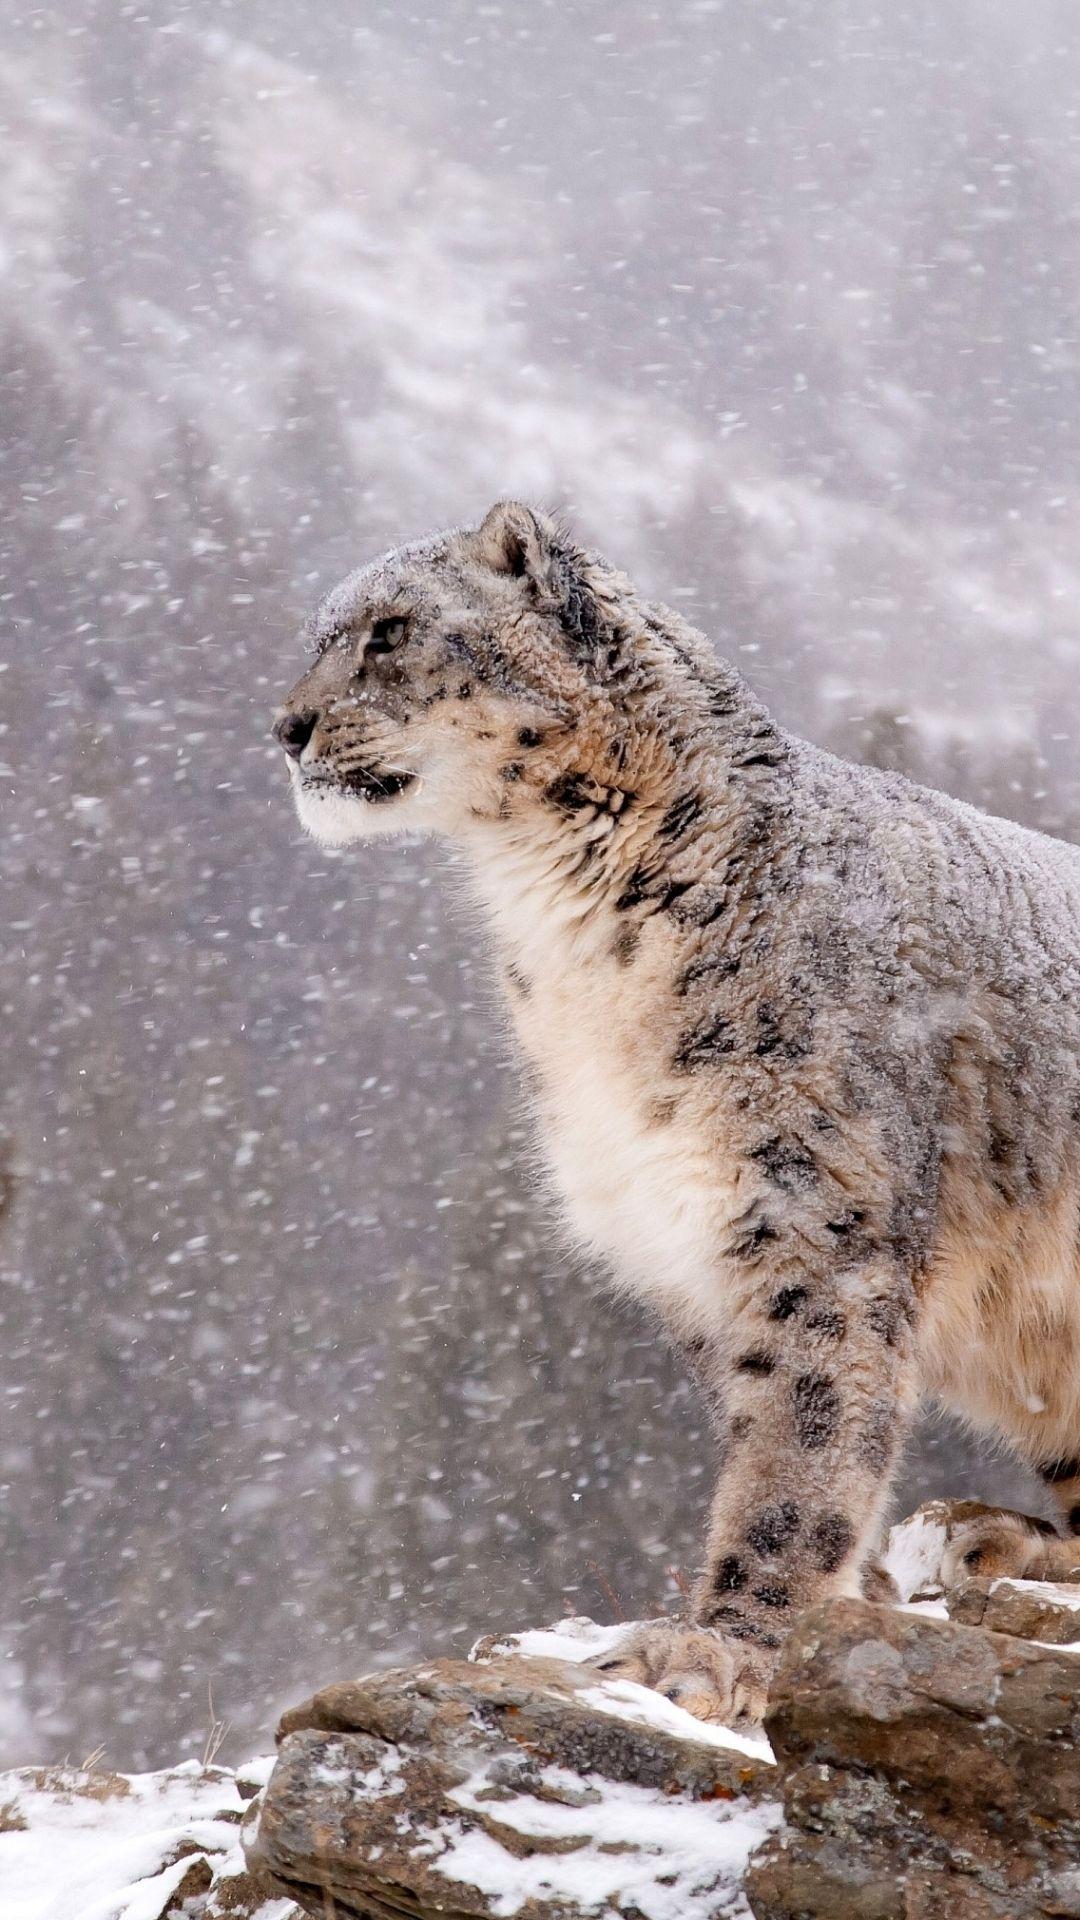 Snow Leopard (Panthera Uncia) Portrait In Winter Free Image and Photograph  200026153.